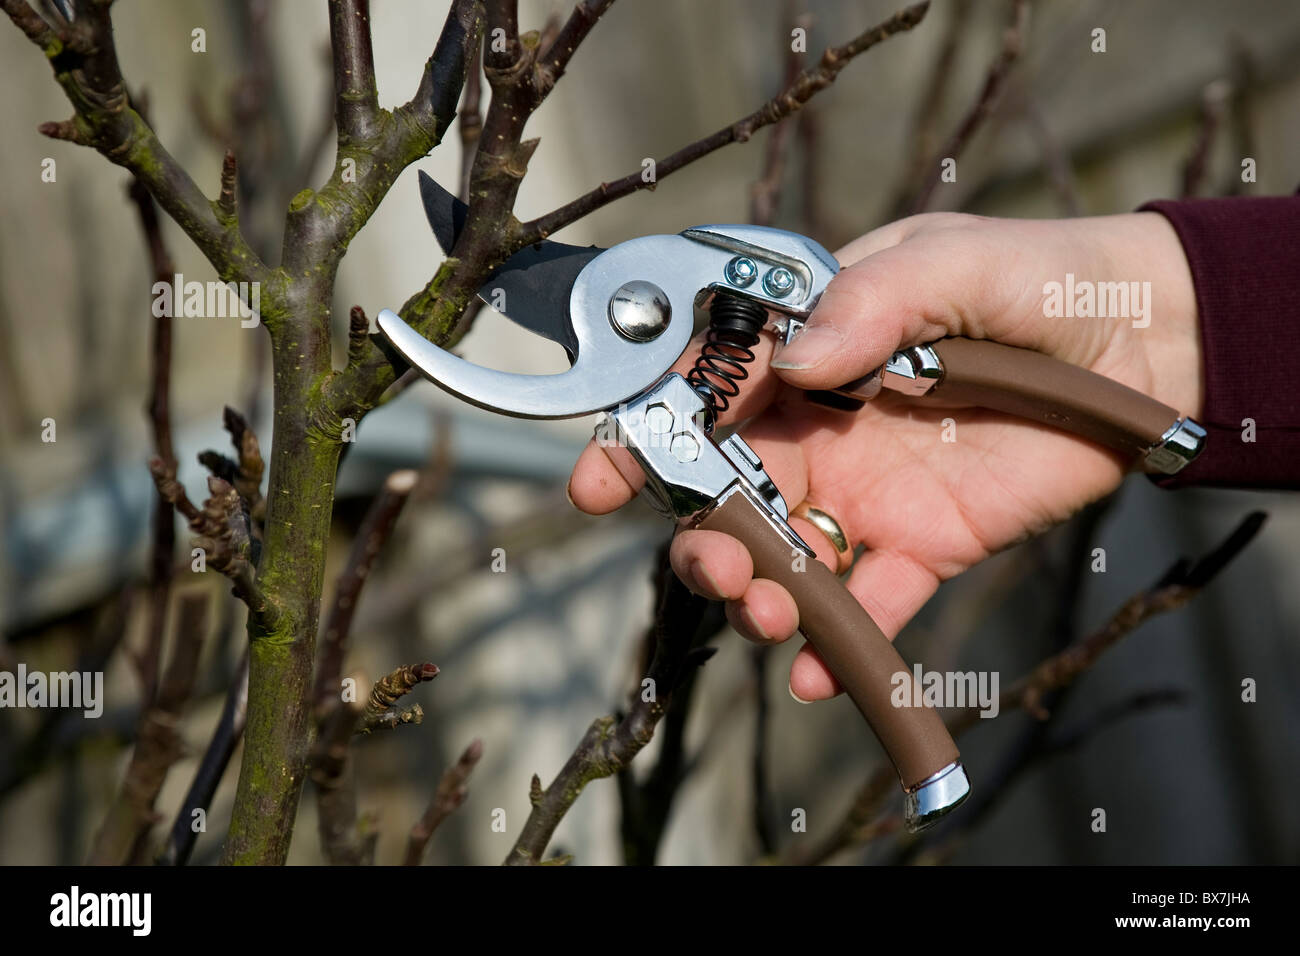 A gardener using some secateurs or pruning shears to trim plants in the garden. Stock Photo